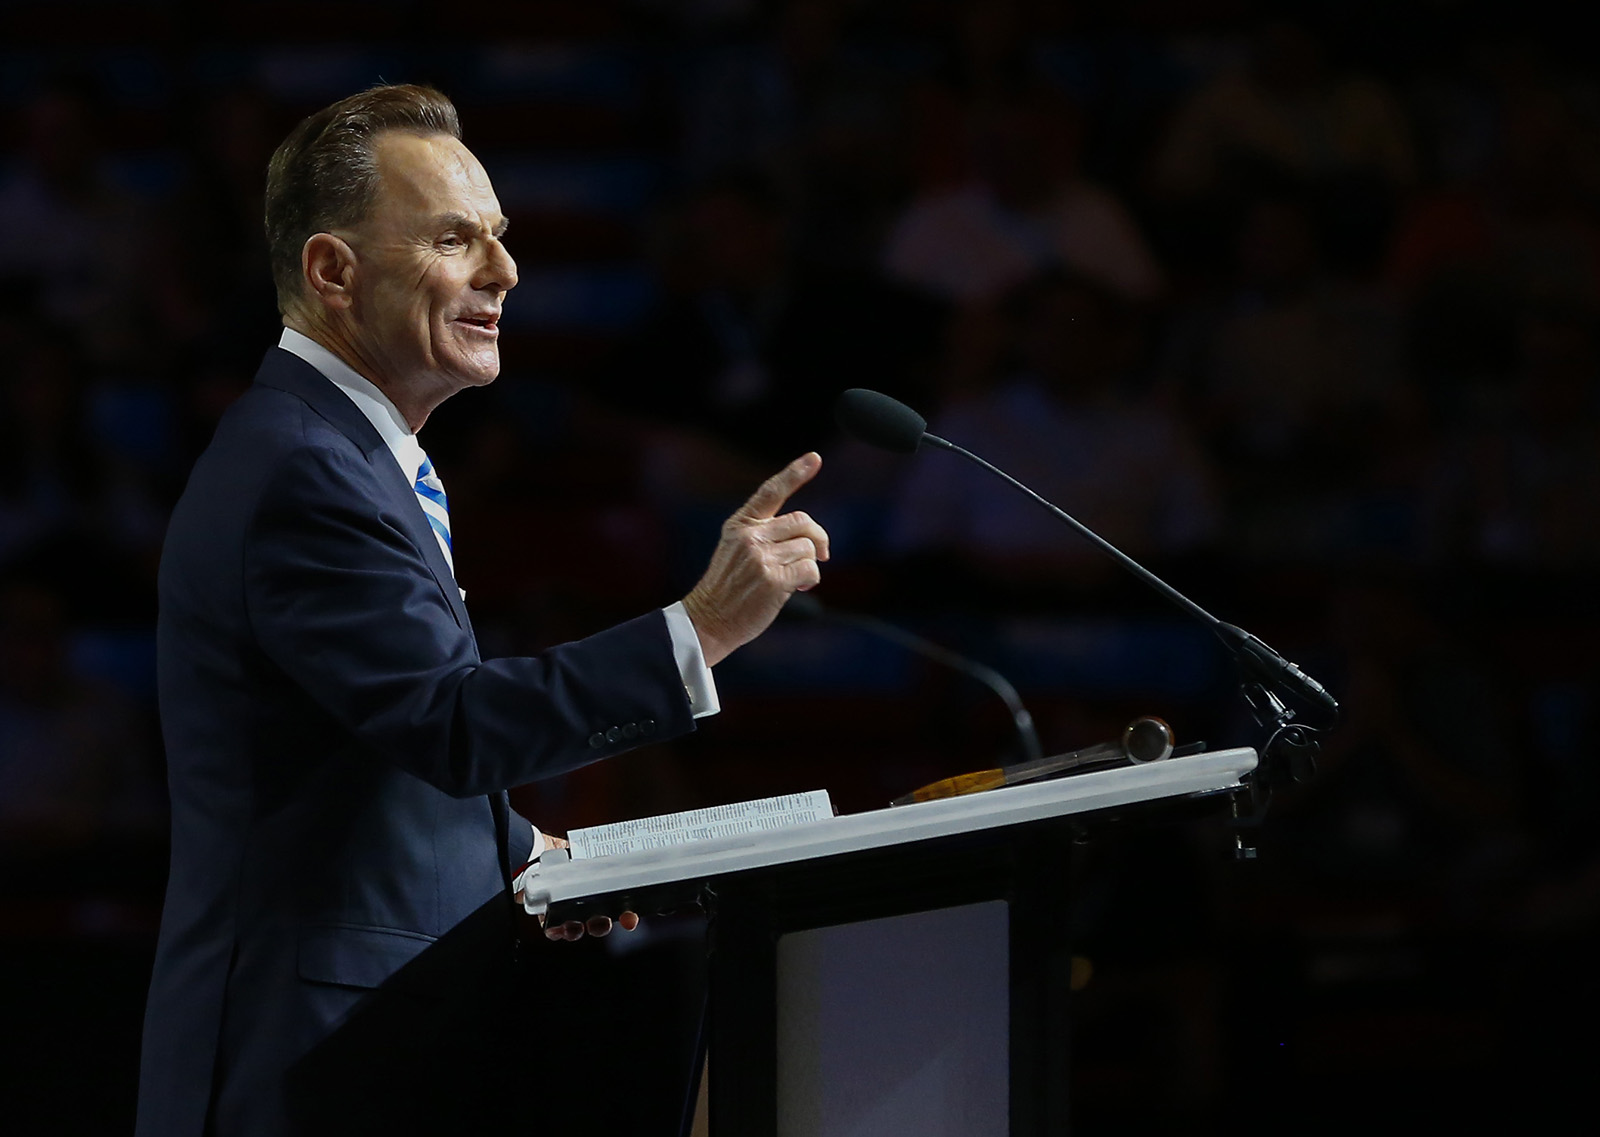 Southern Baptist Convention President of the Executive Committee Ronnie Floyd speaks during the annual meeting of the Southern Baptist Convention at the BJCC in Birmingham, Ala. on June 11, 2019.RNS Photo by Butch Dill.